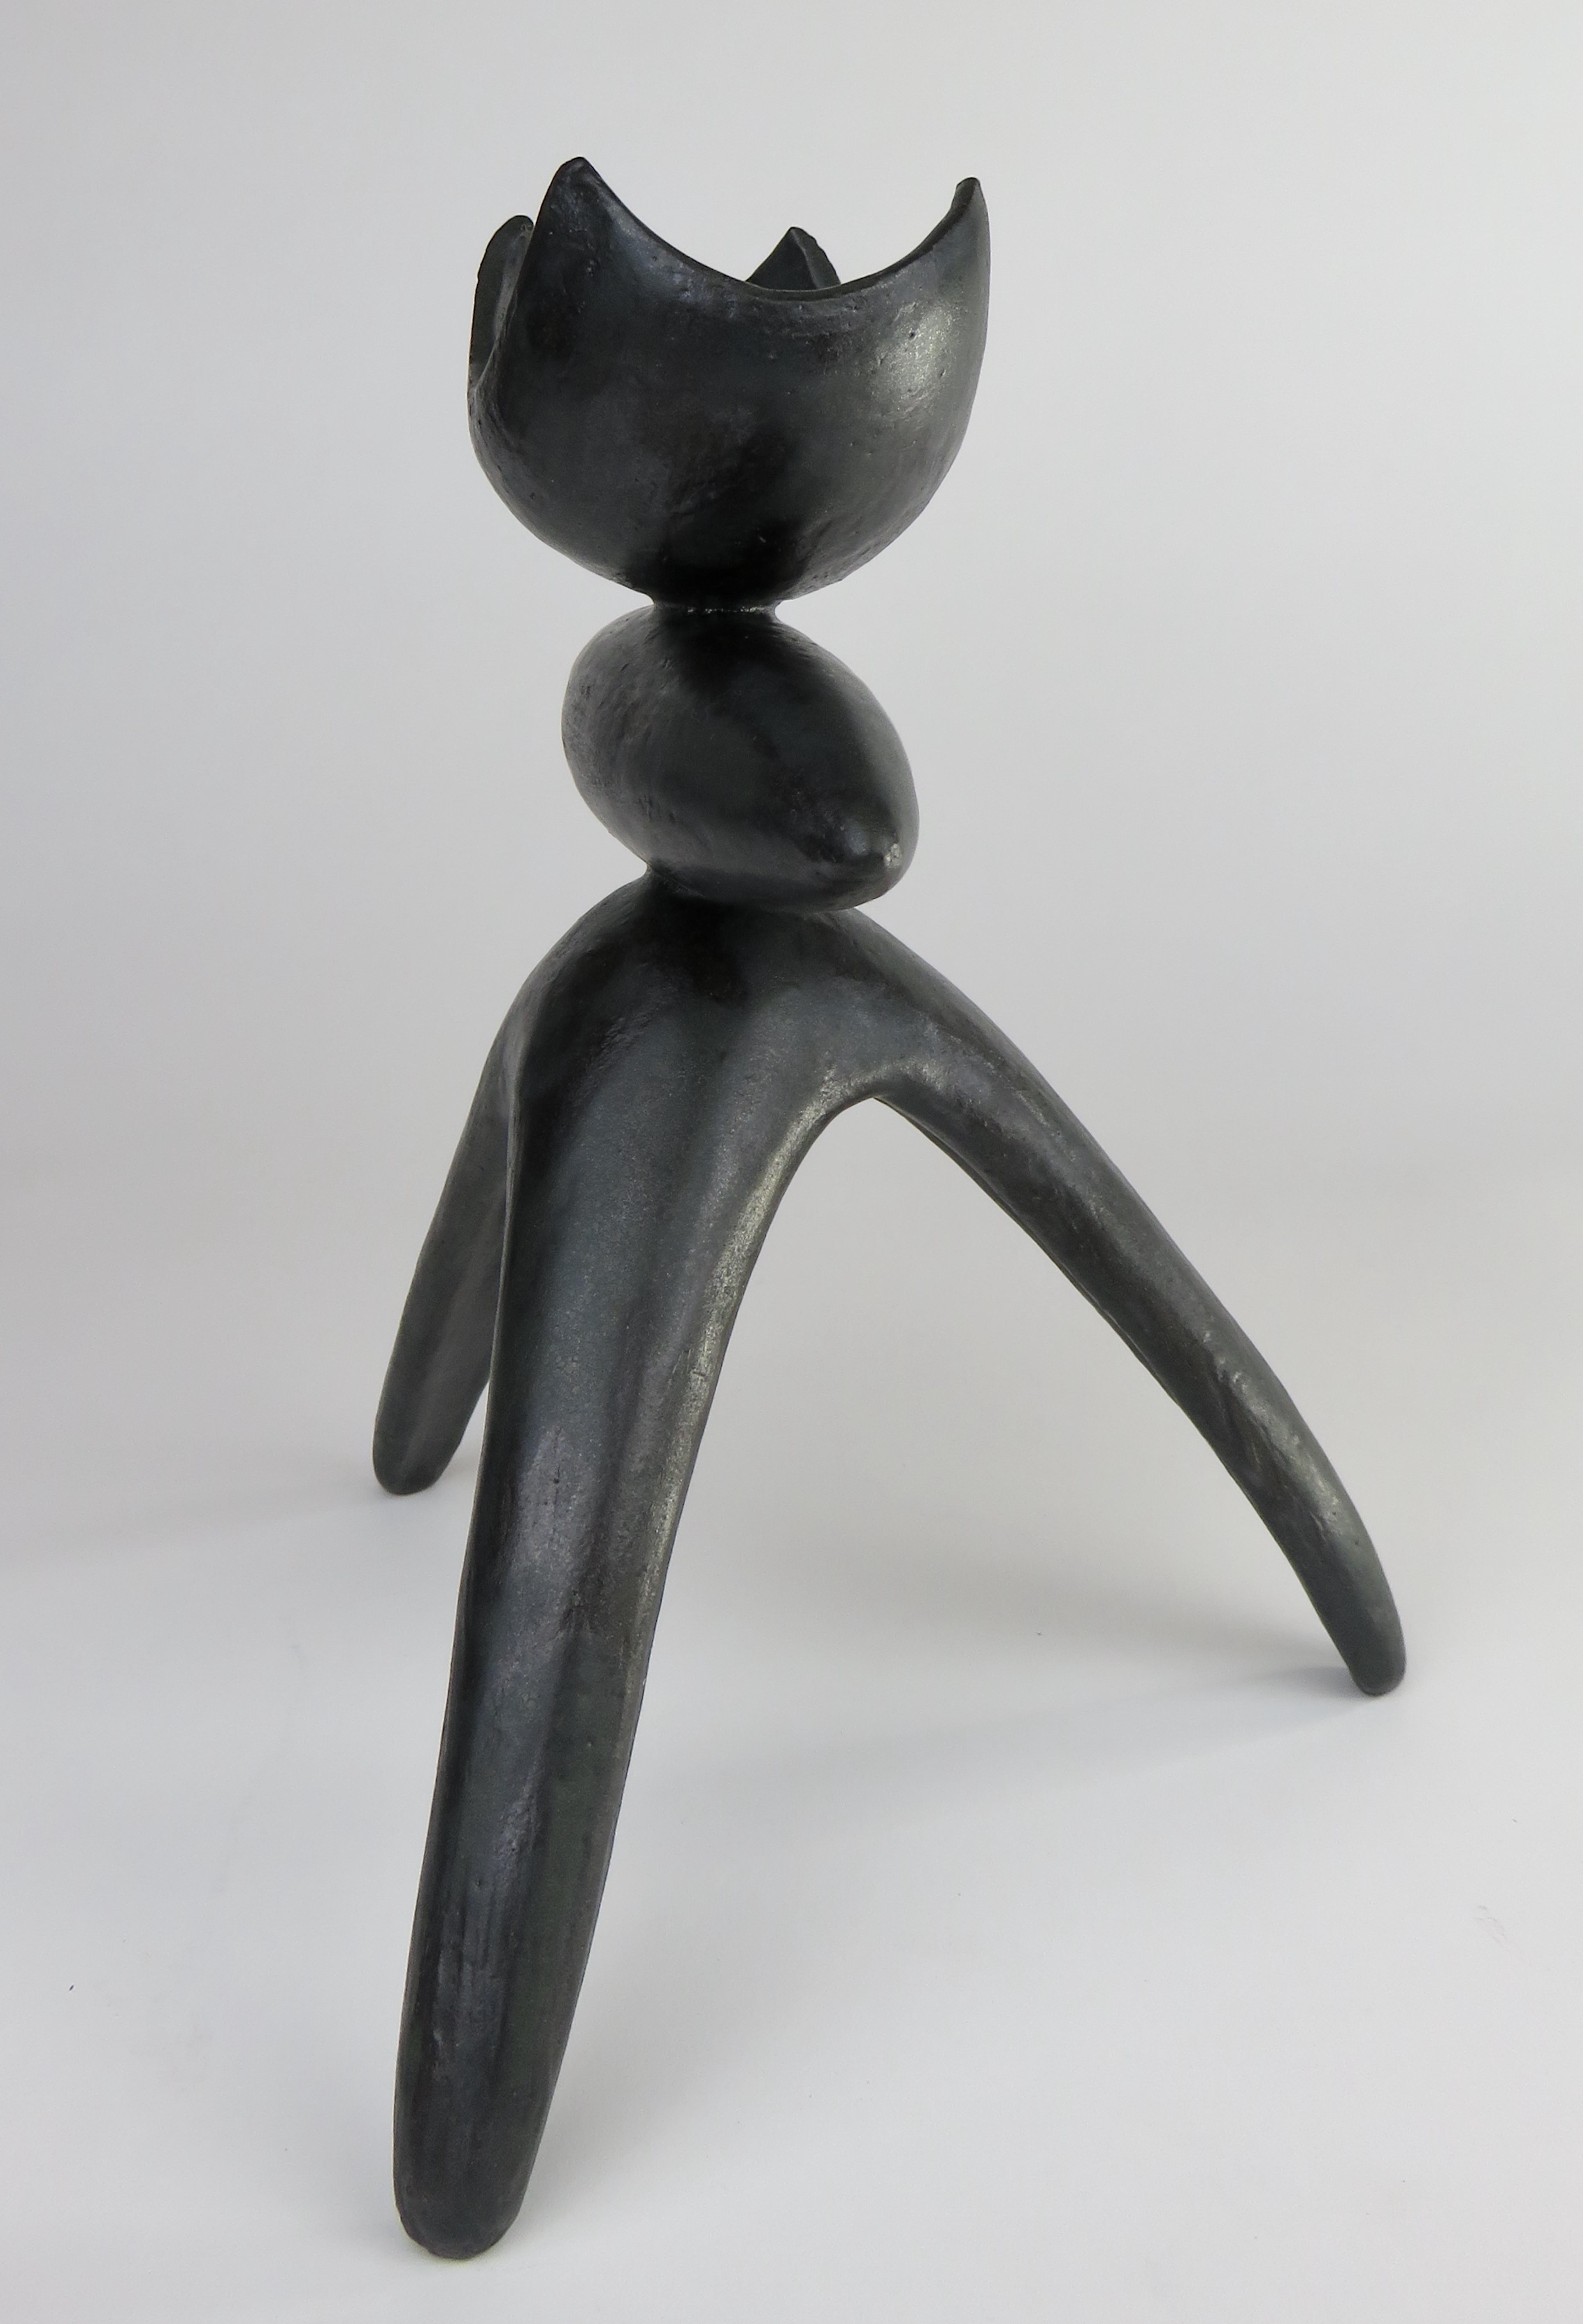 This glazed black hand built ceramic Modern TOTEM consists of an open arc'd top with a middle elliptical shape on tripod legs. Part of a series of Modern Totemic works. The dark brown stoneware clay is hand formed in 3 sections which are attached